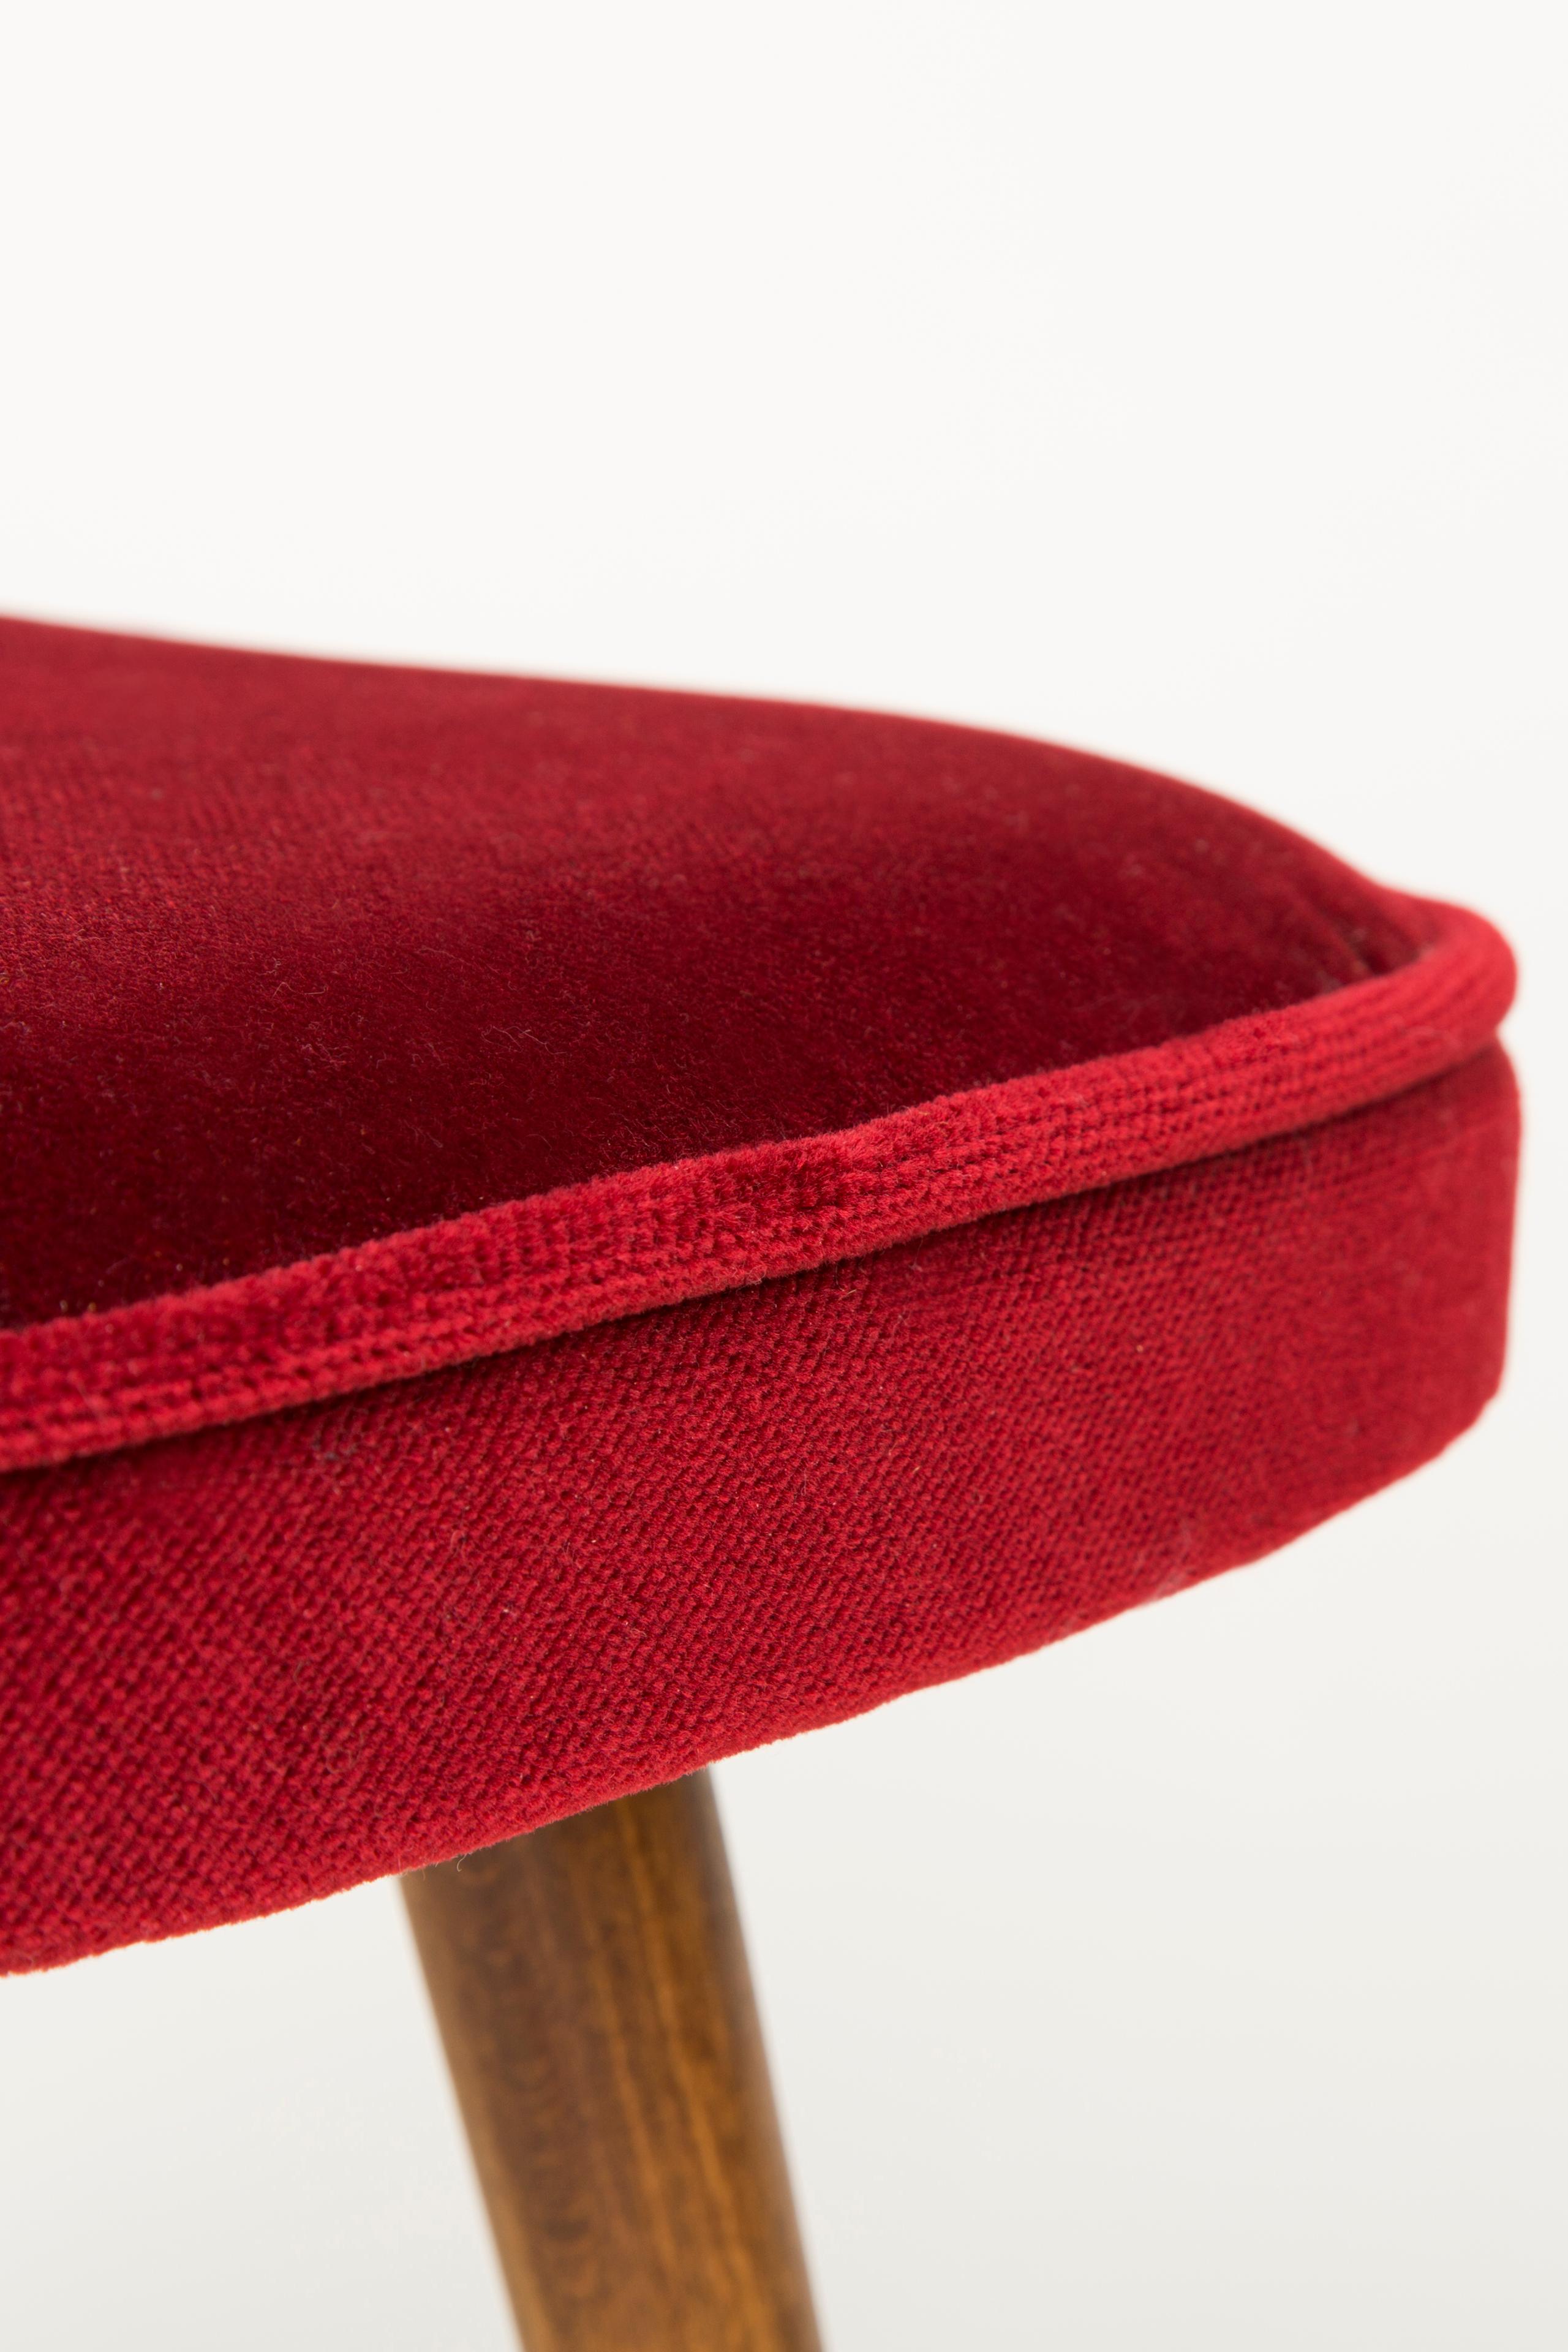 Stool from the turn of the 1960s and 1970s. Beautiful soft velvet burgundy upholstery. The stool consists of an upholstered part, a seat and wooden legs narrowing downwards, characteristic of the 1960s style. We can prepare this stool also in